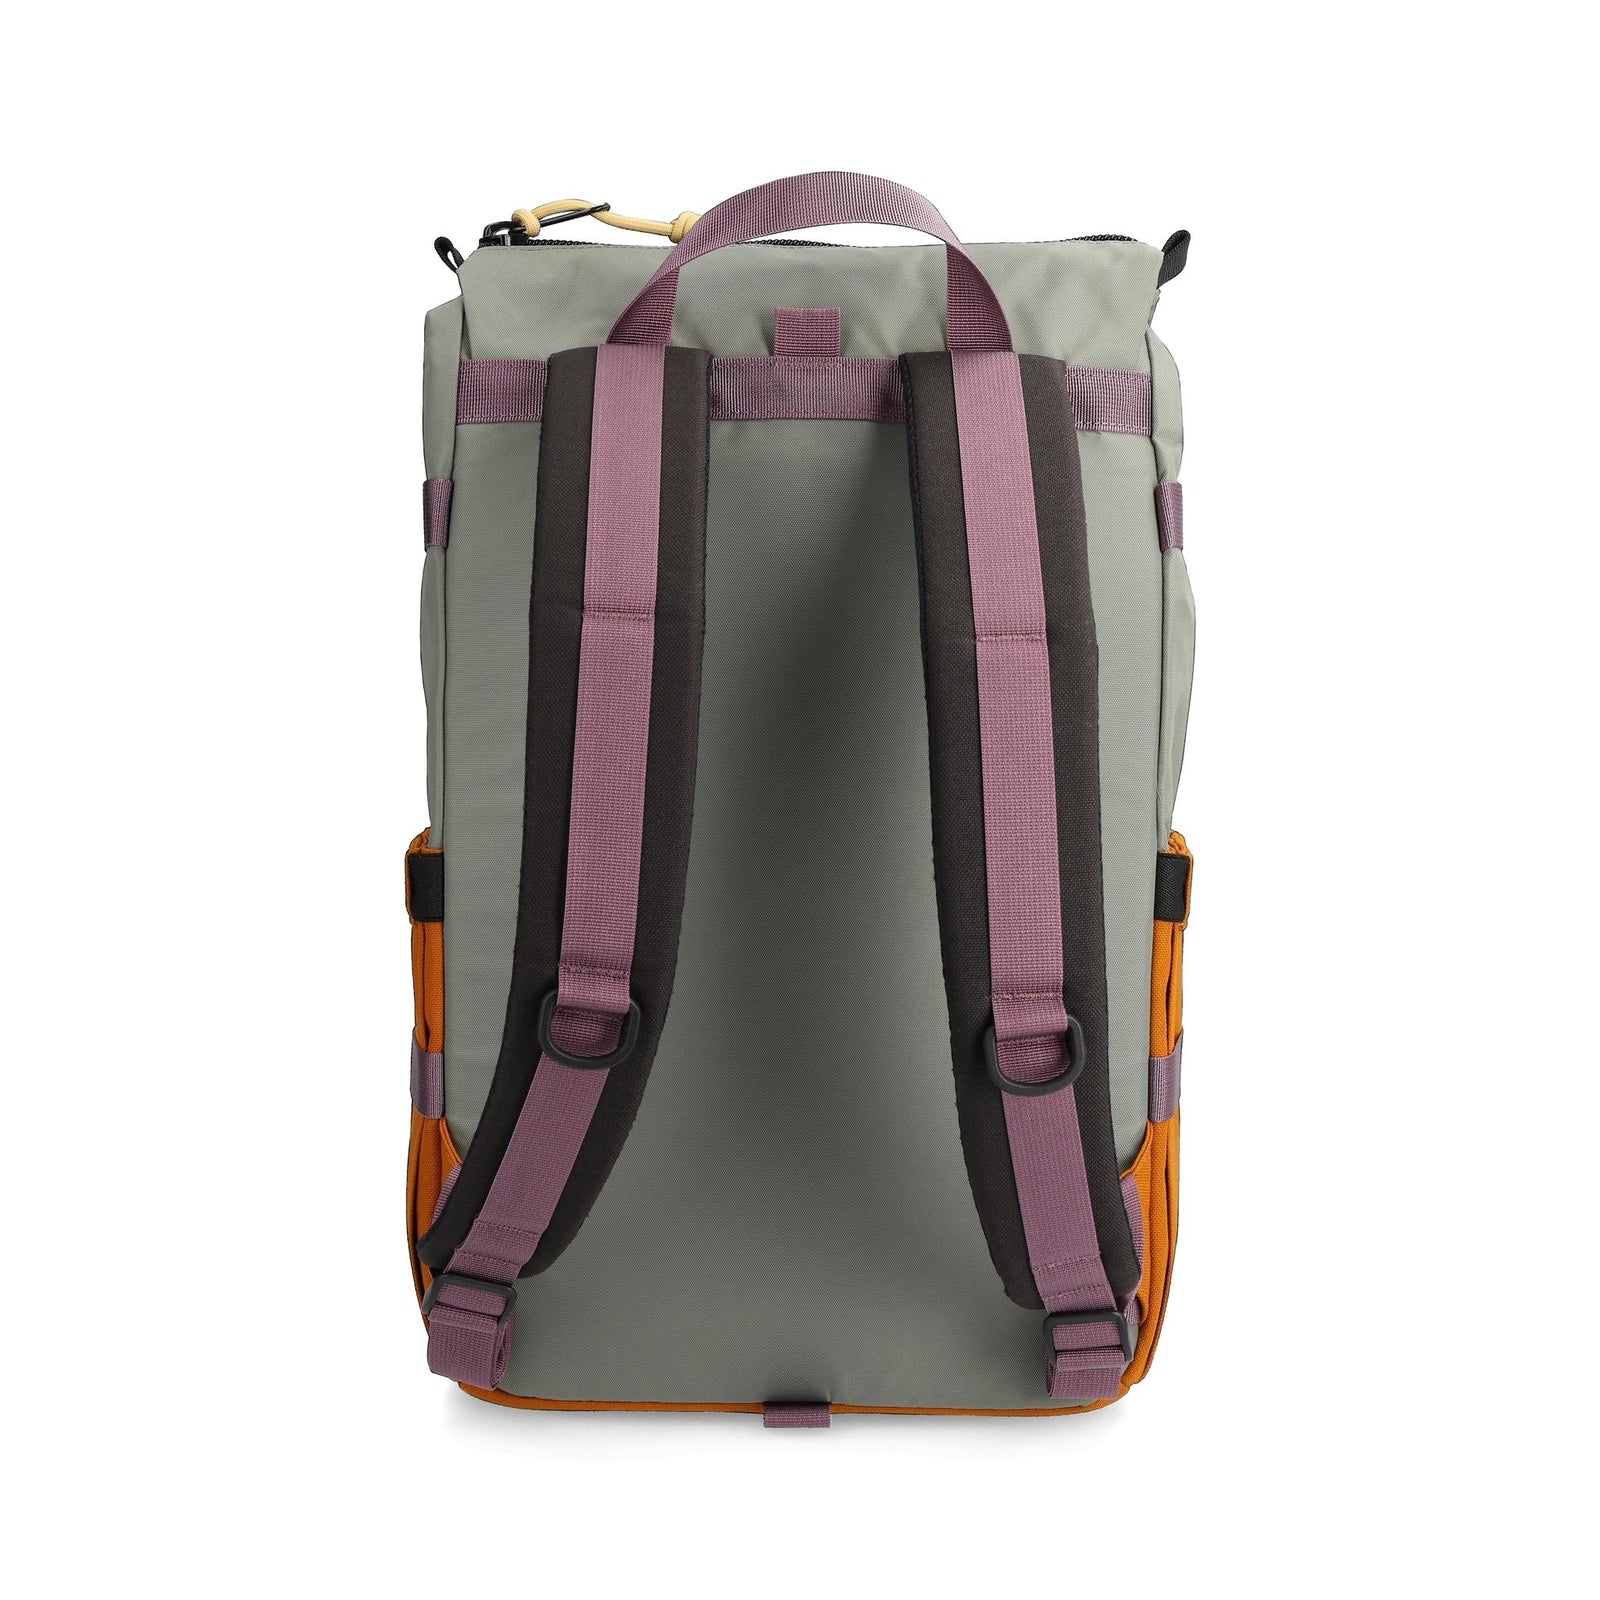 Back View of Topo Designs Rover Pack Classic in "Beetle / Spice"